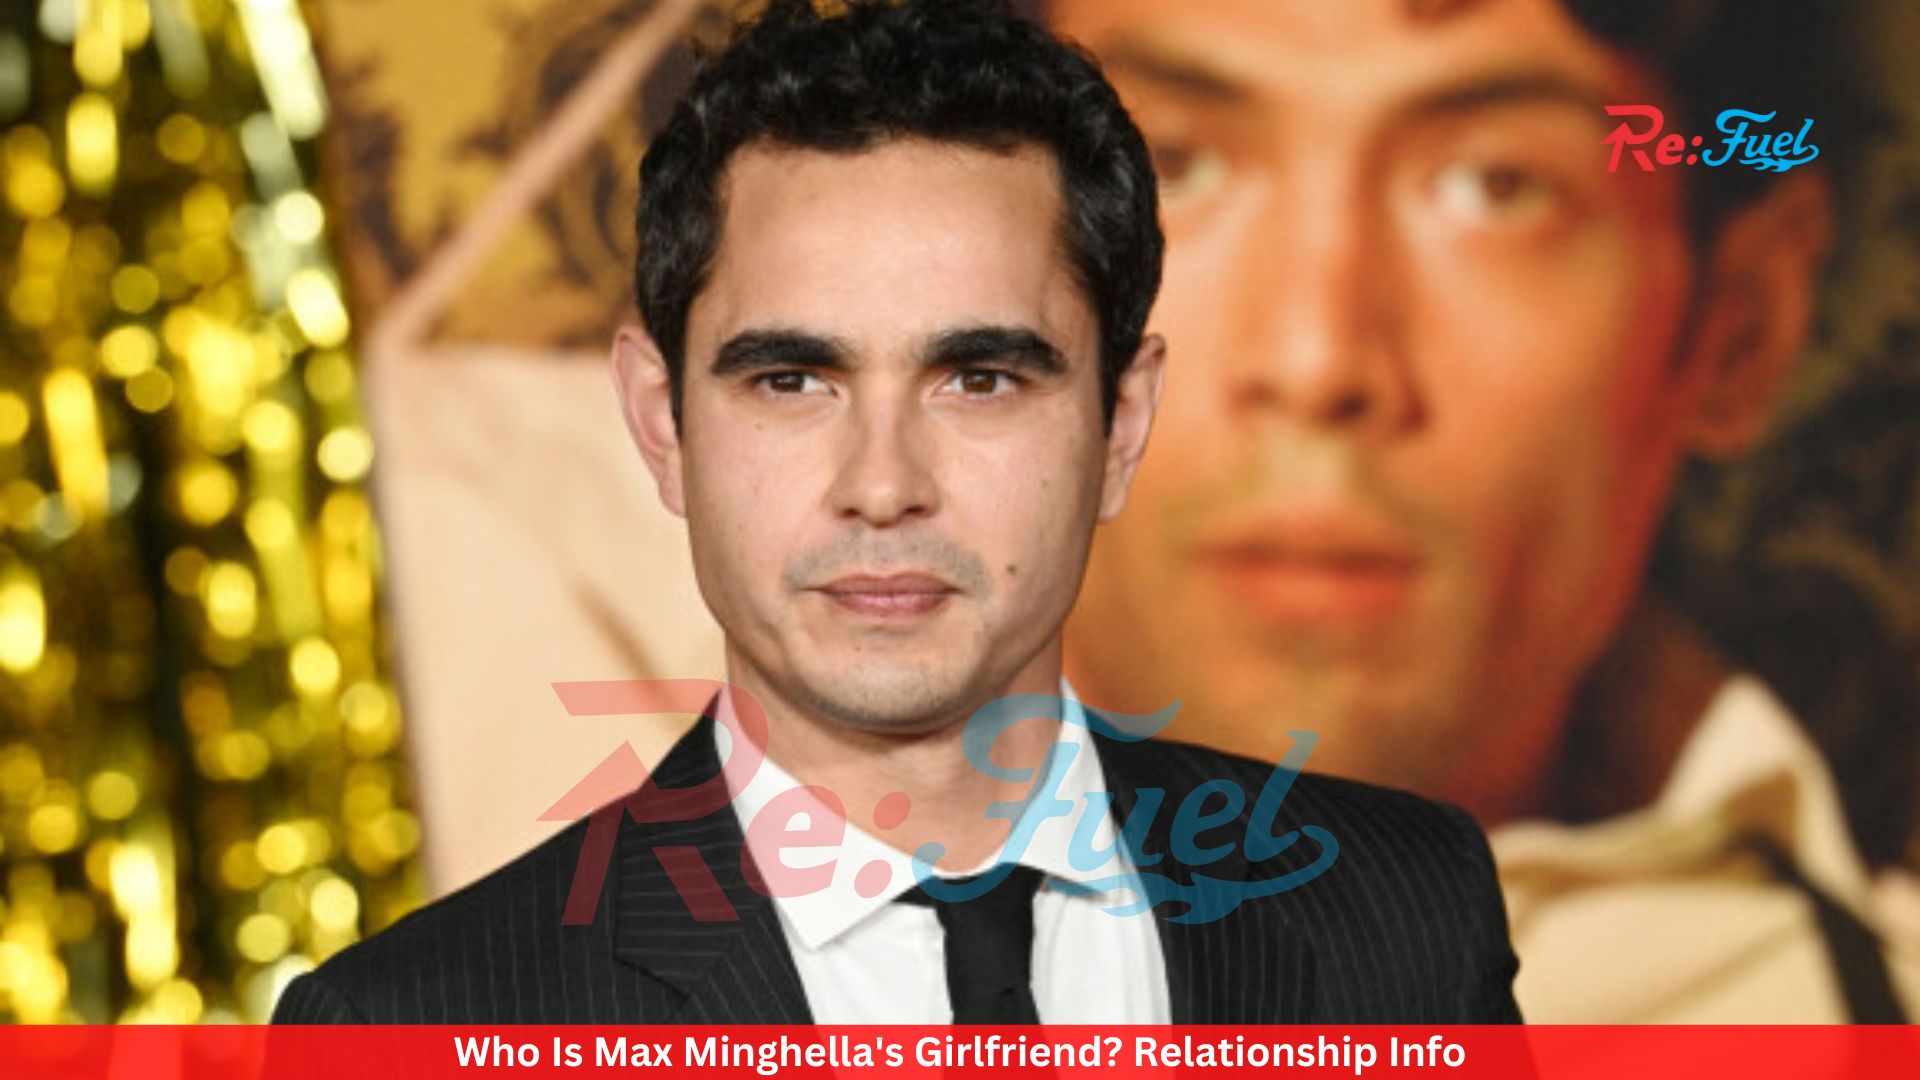 Who Is Max Minghella's Girlfriend? Relationship Info